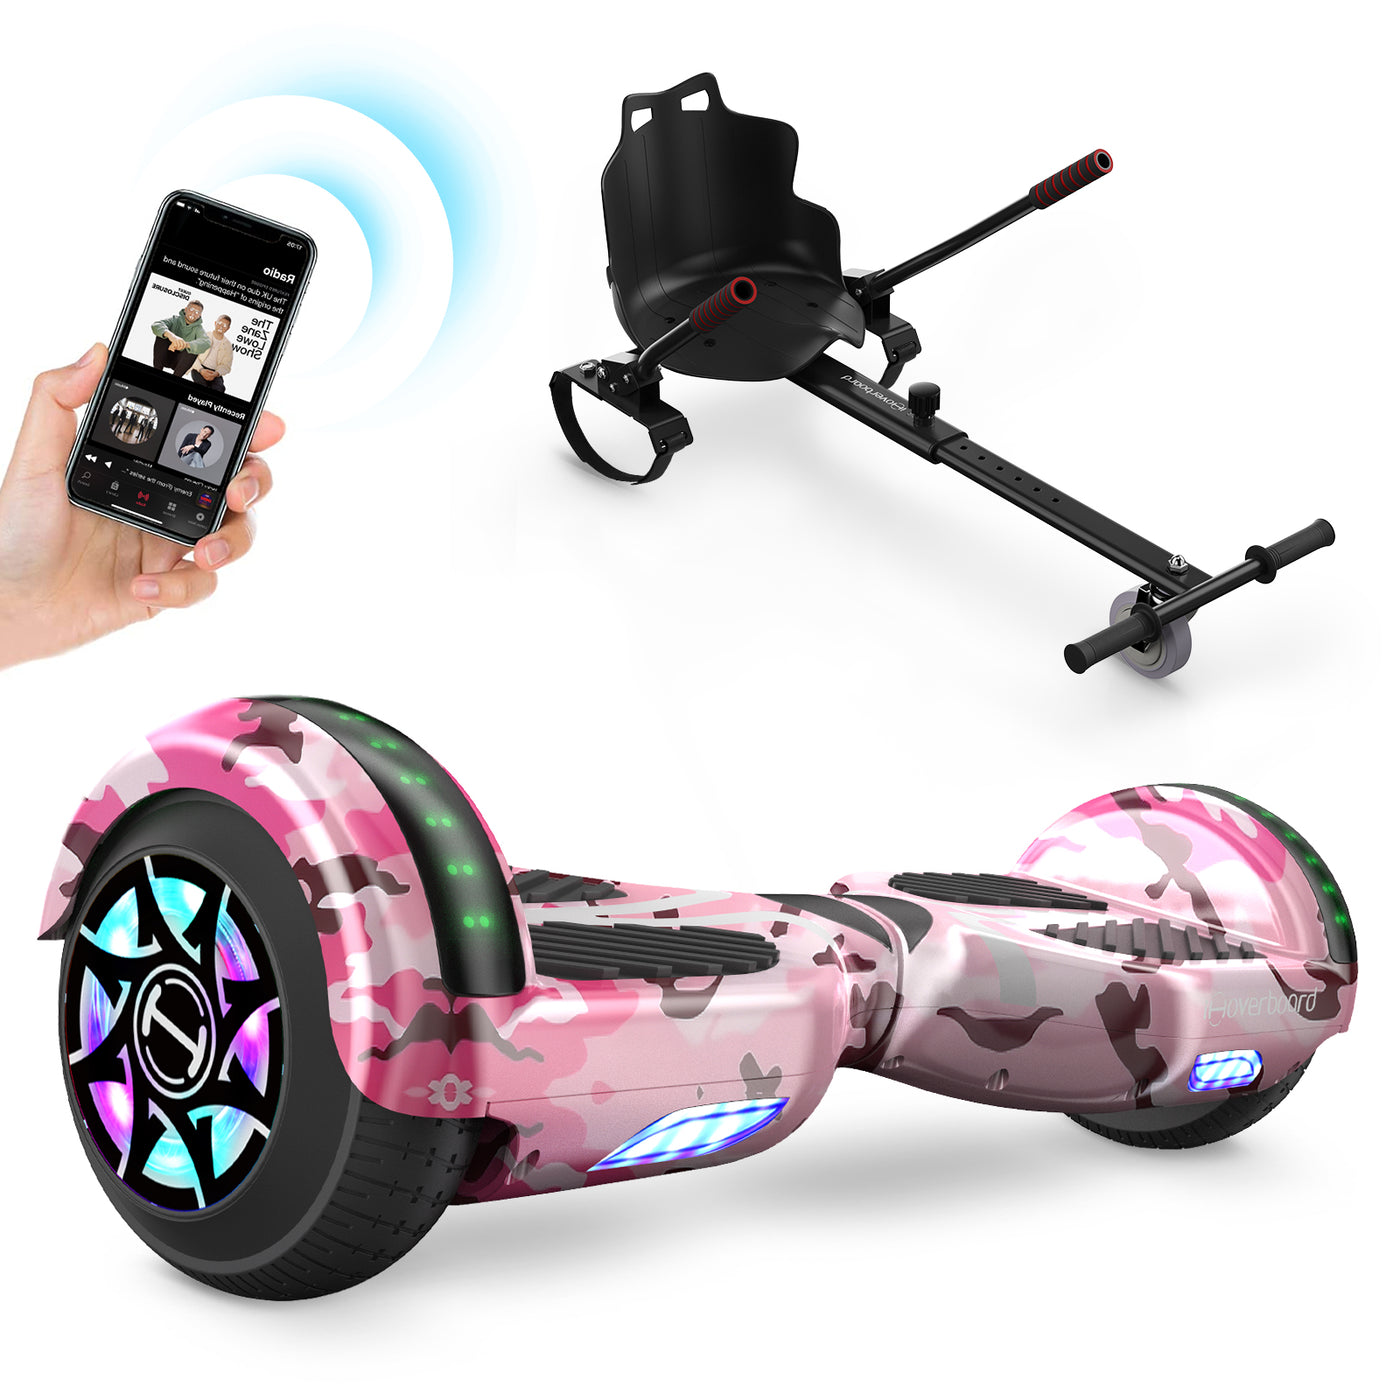 iHoverboard Self Balancing Hoverboard with Dual 350W Motor (700W)